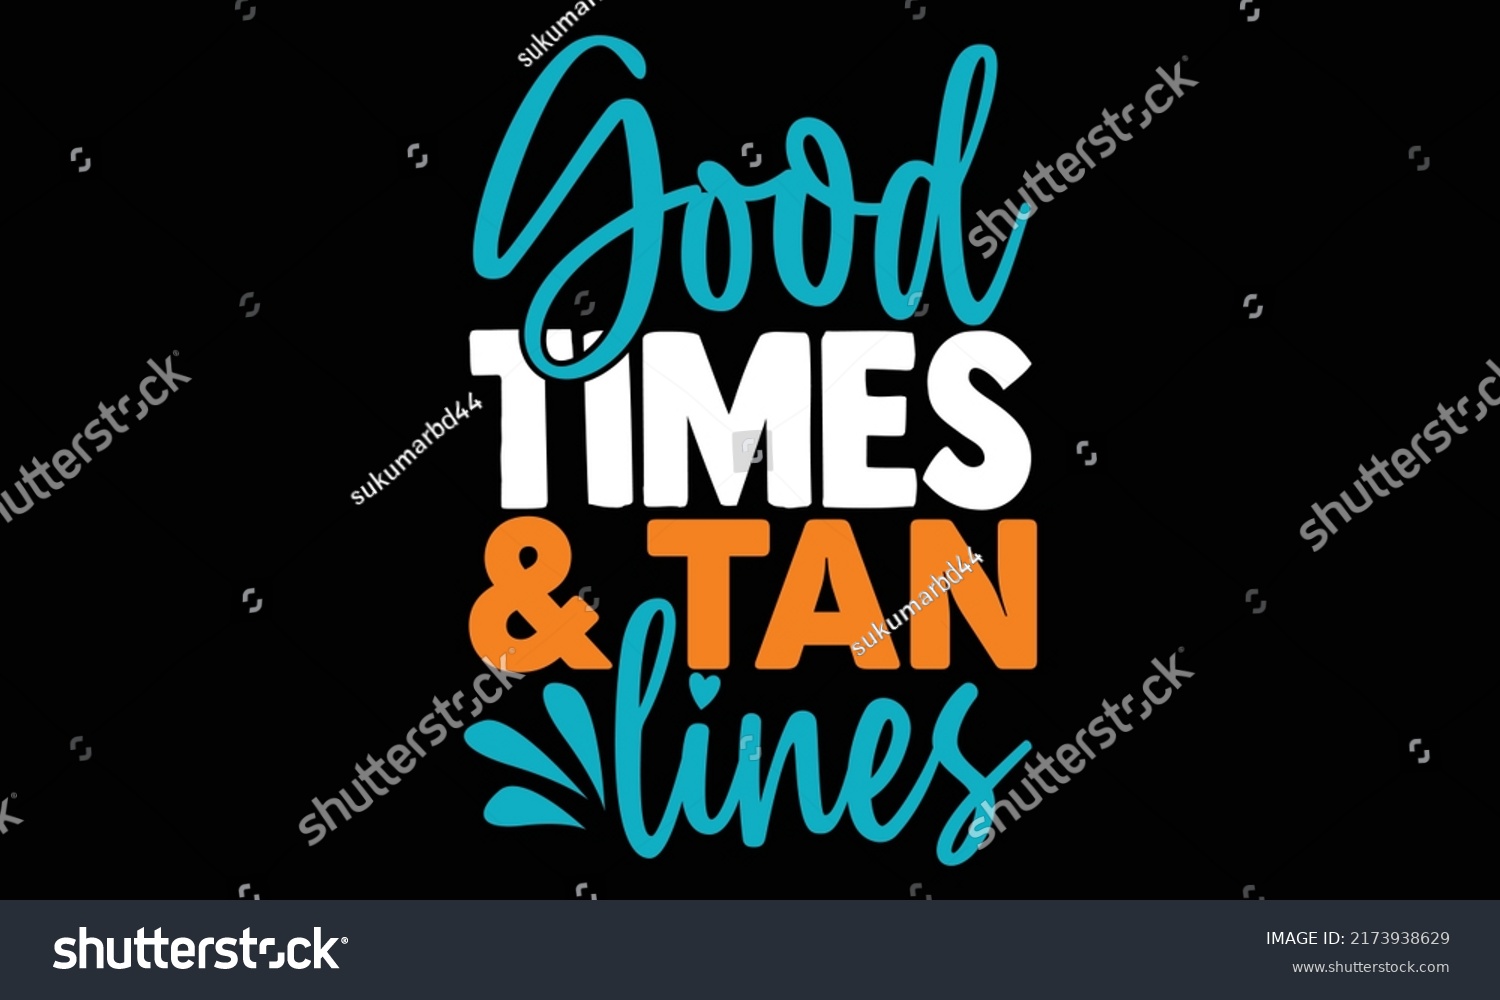 SVG of Good times and tan lines - summertime t shirts design, Hand drawn lettering phrase, Calligraphy t shirt design, Isolated on white background, svg Files for Cutting and Silhouette, EPS 10 svg